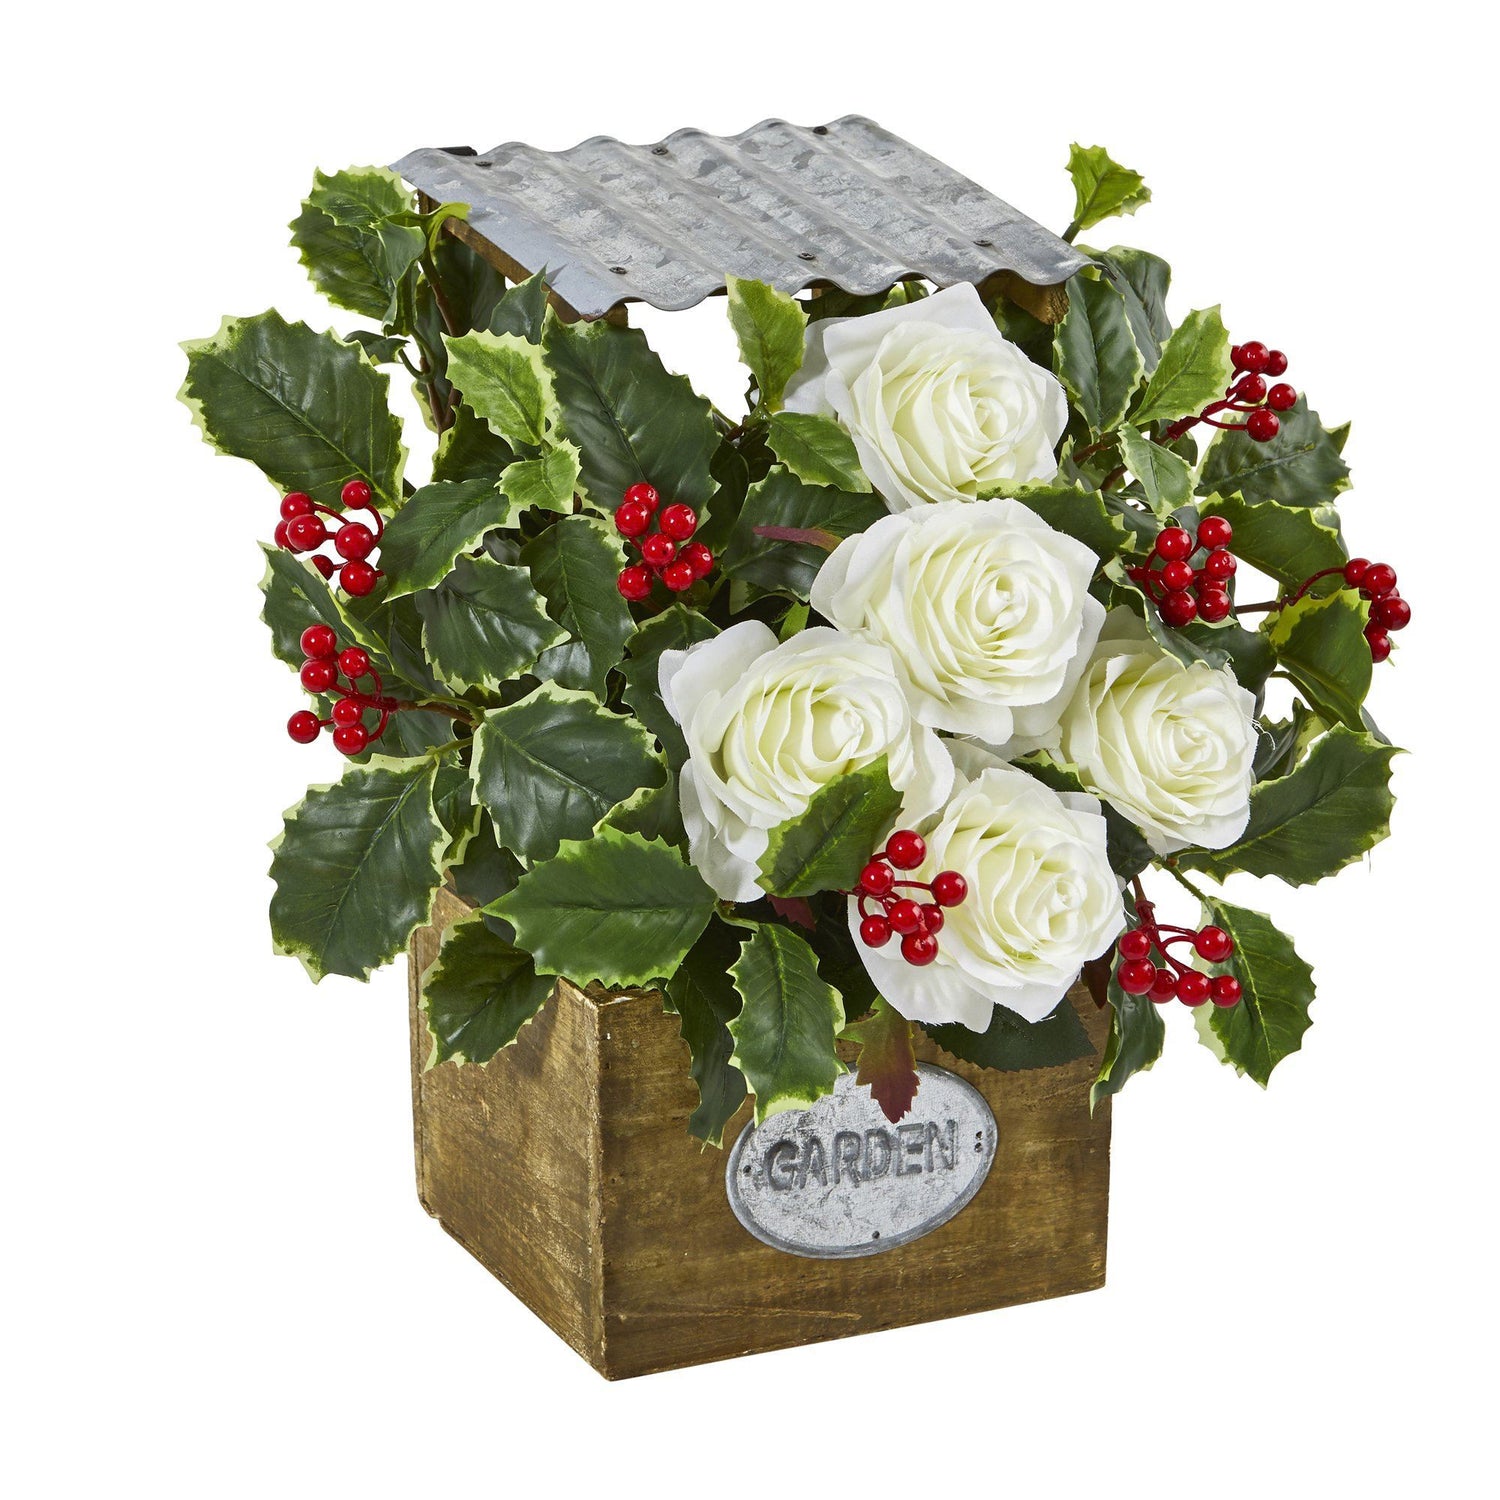 14” Rose and Variegated Holly Leaf Artificial Arrangement in Tin Roof Planter